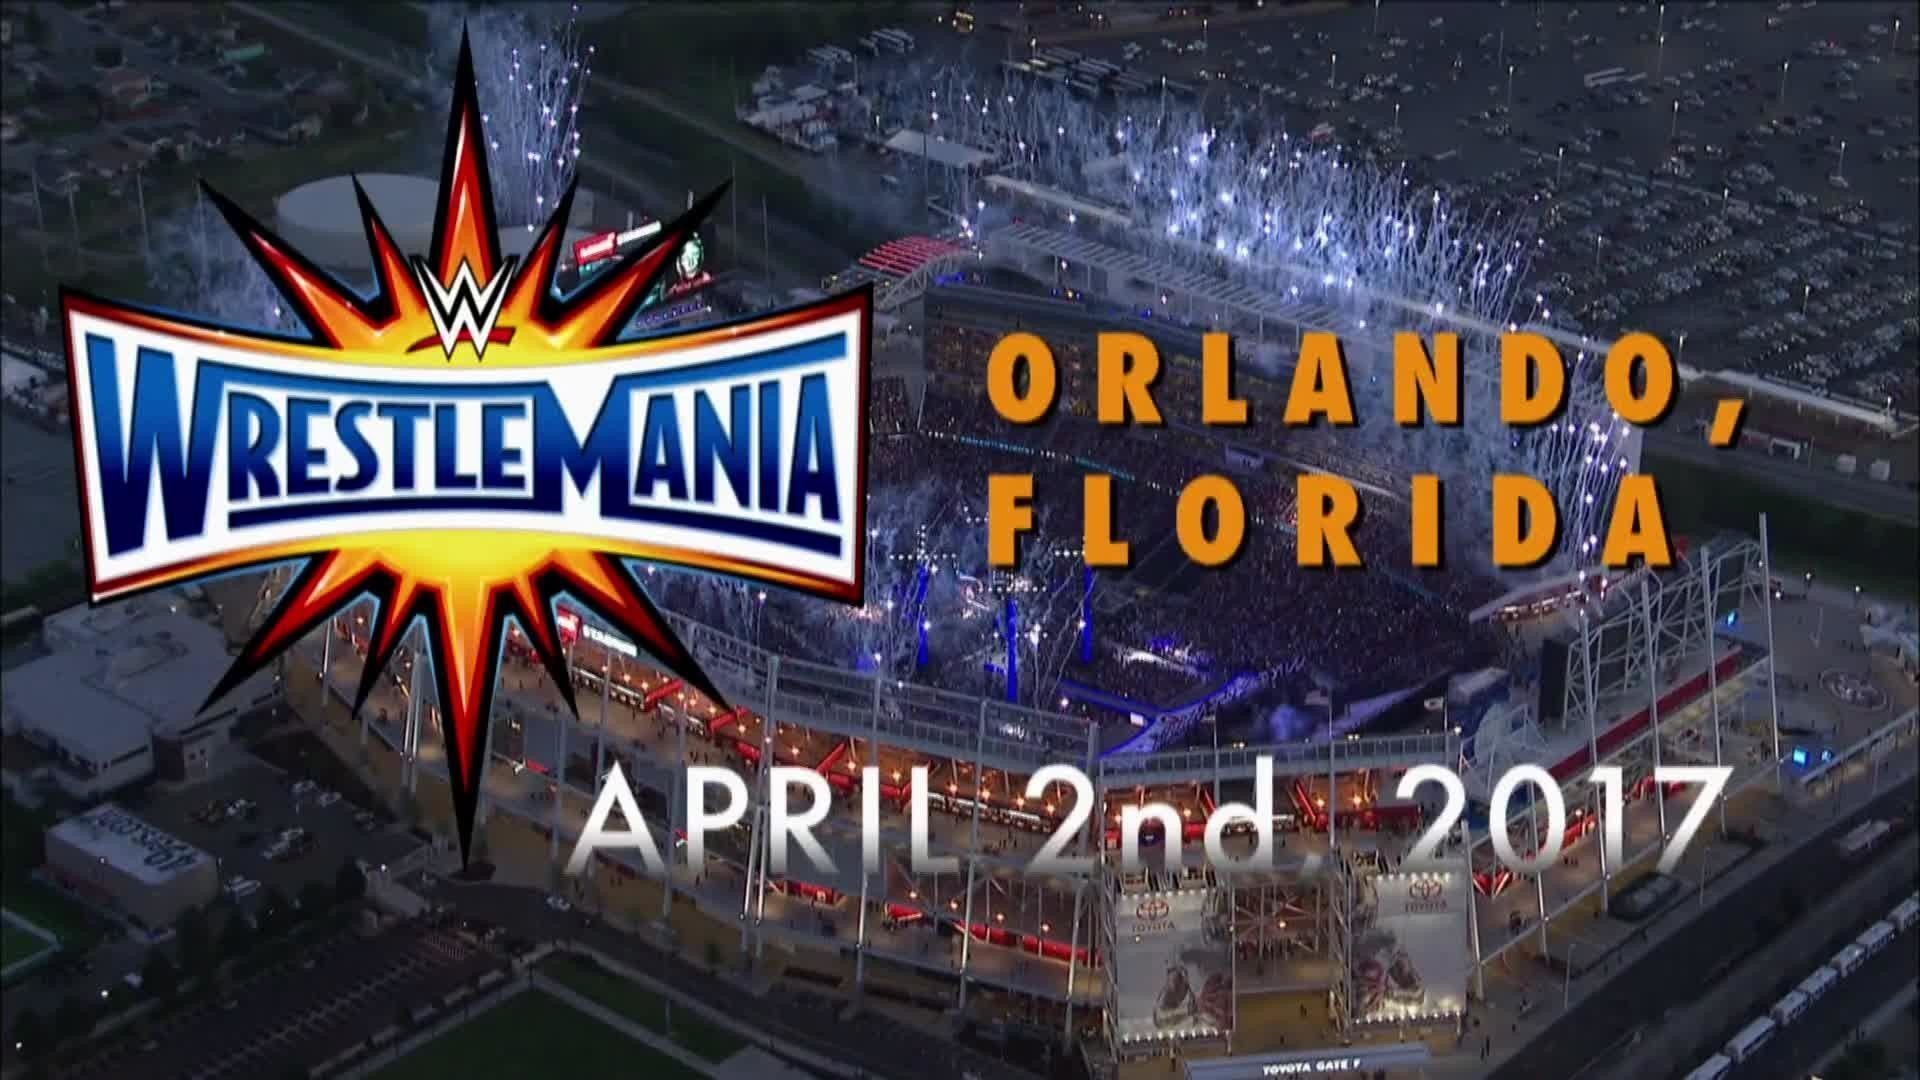 1920x1080 9 Matches That Could Happen at Wrestlemania 33 - Uniwrestling.com